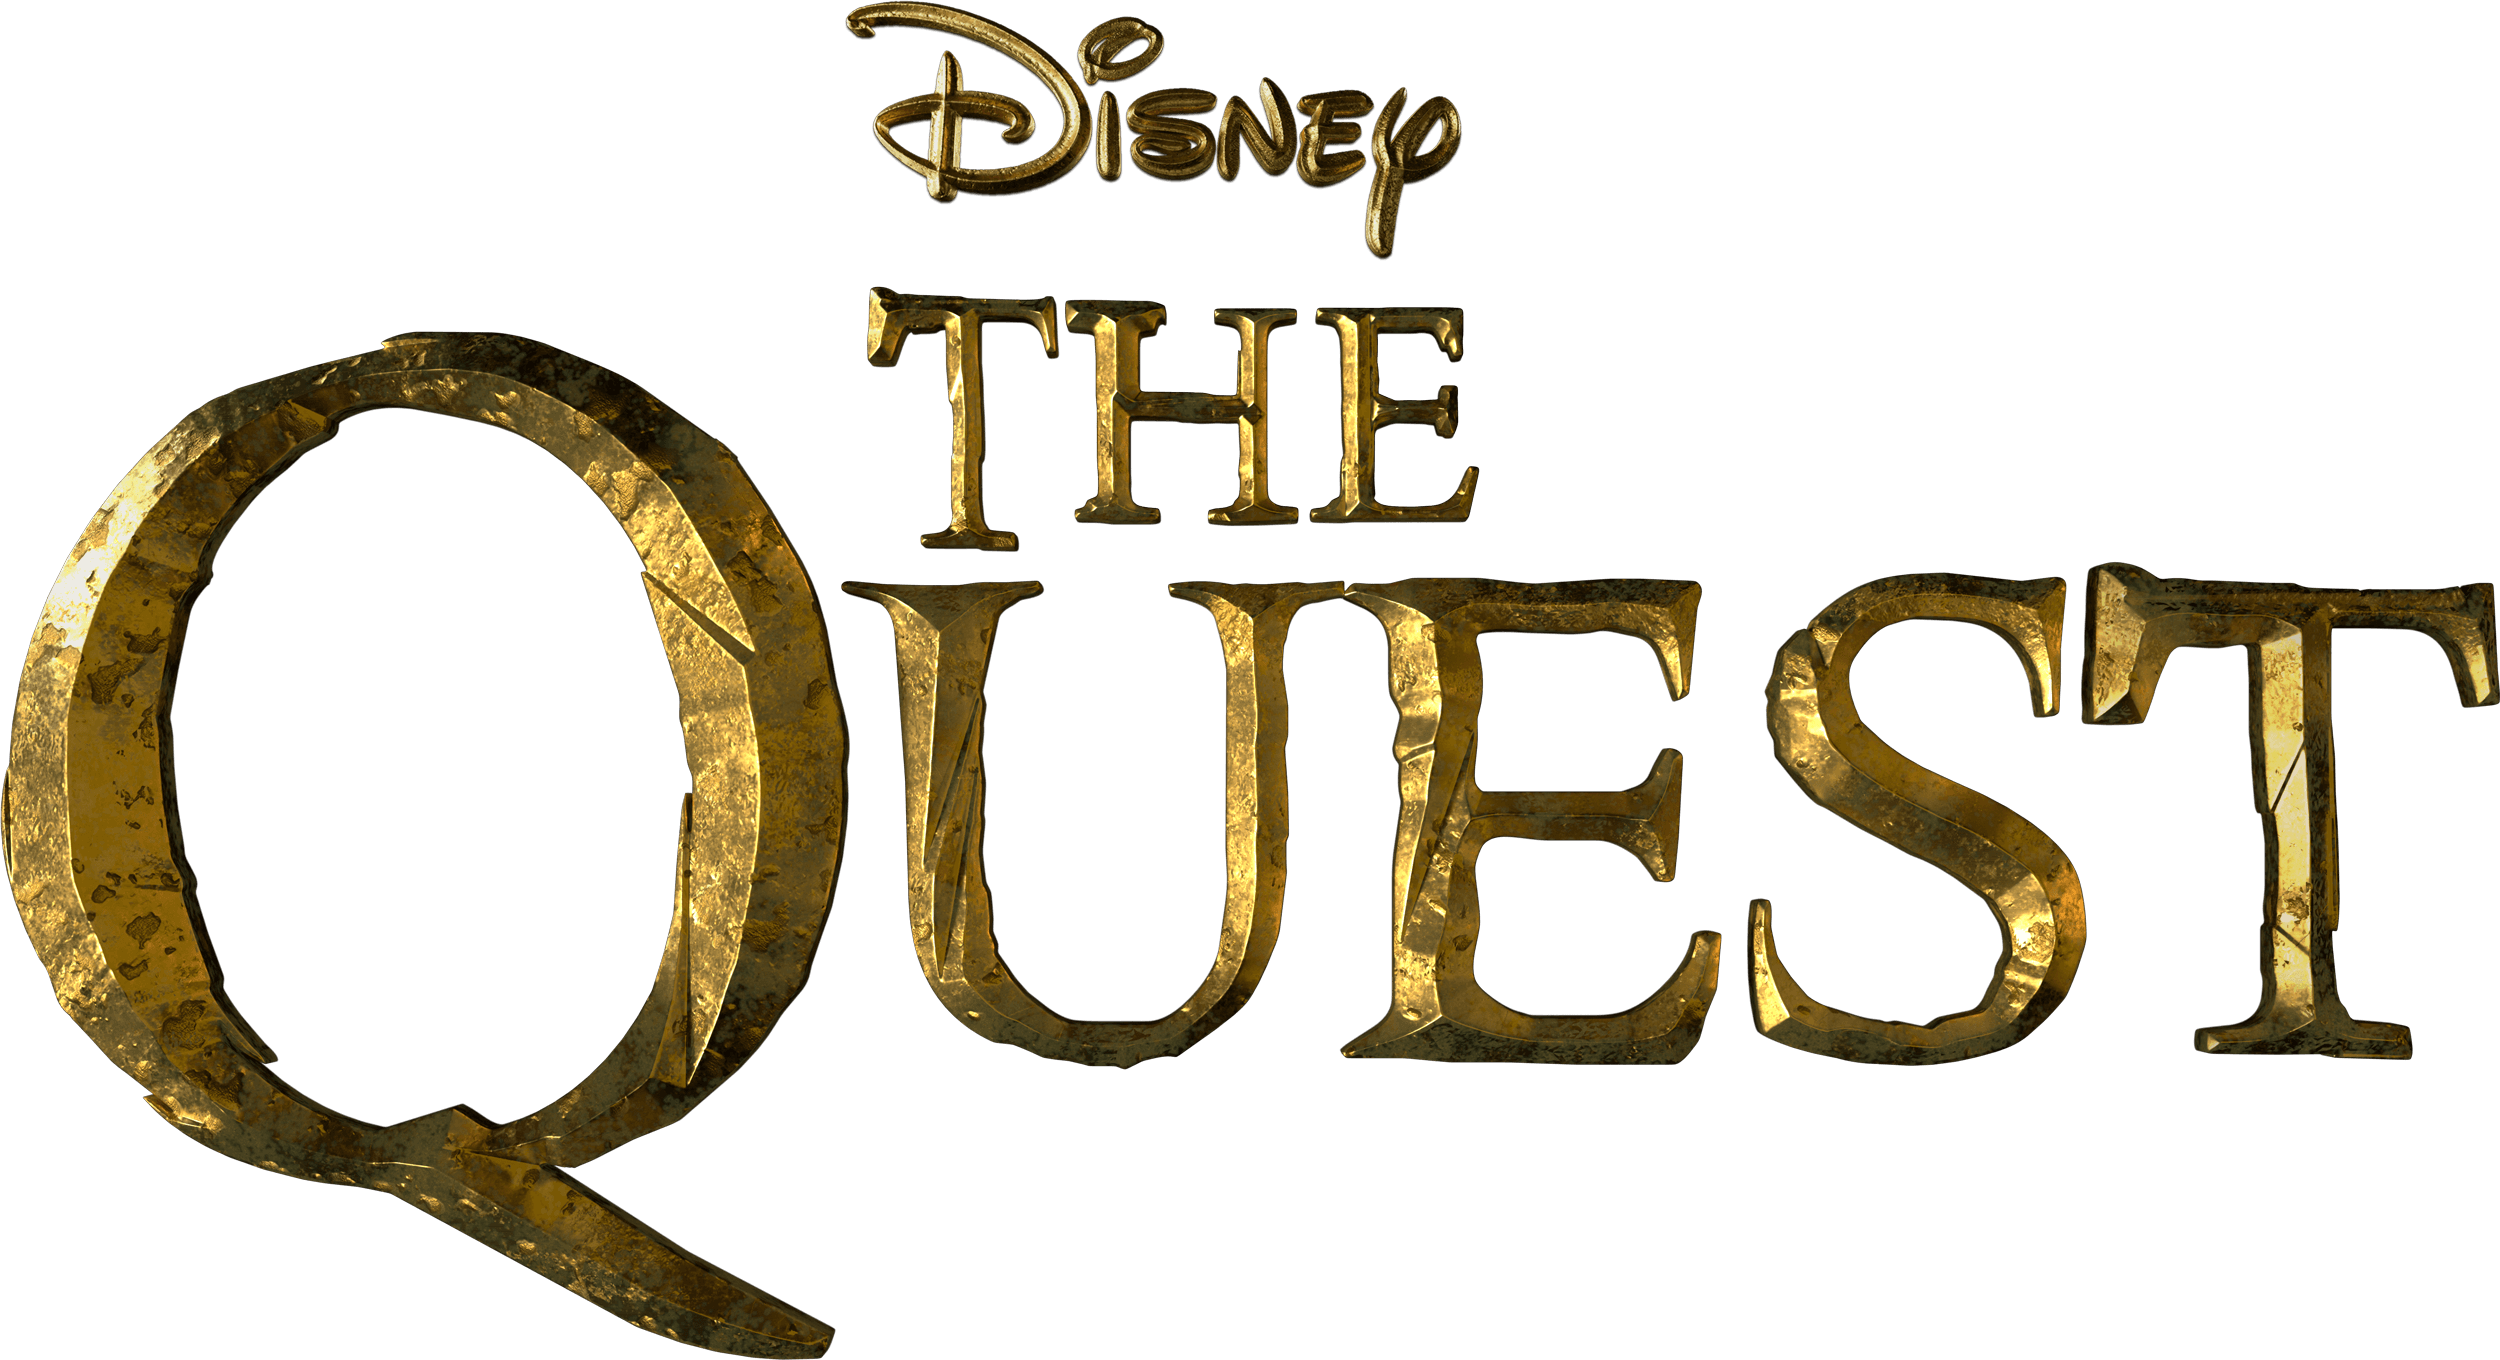 The Quest logo